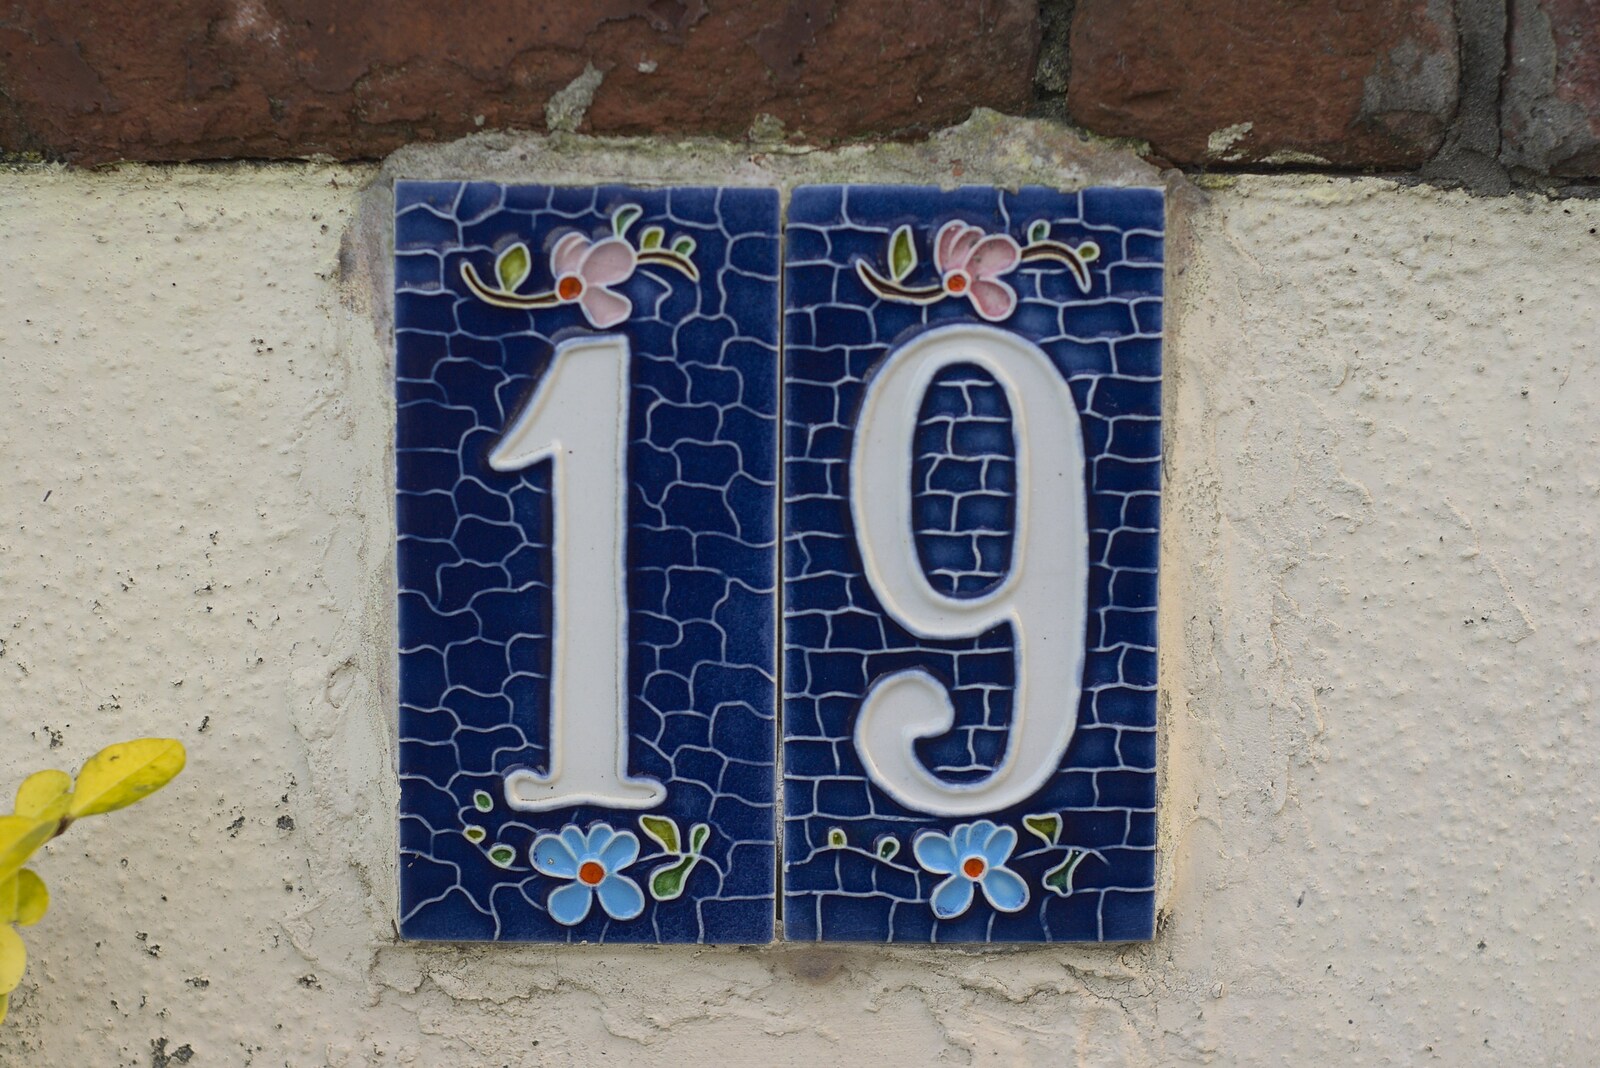 Ceramic tiles on Number 19 from Christmas at Number 19, Blackrock, County Dublin, Ireland - 25th December 2009